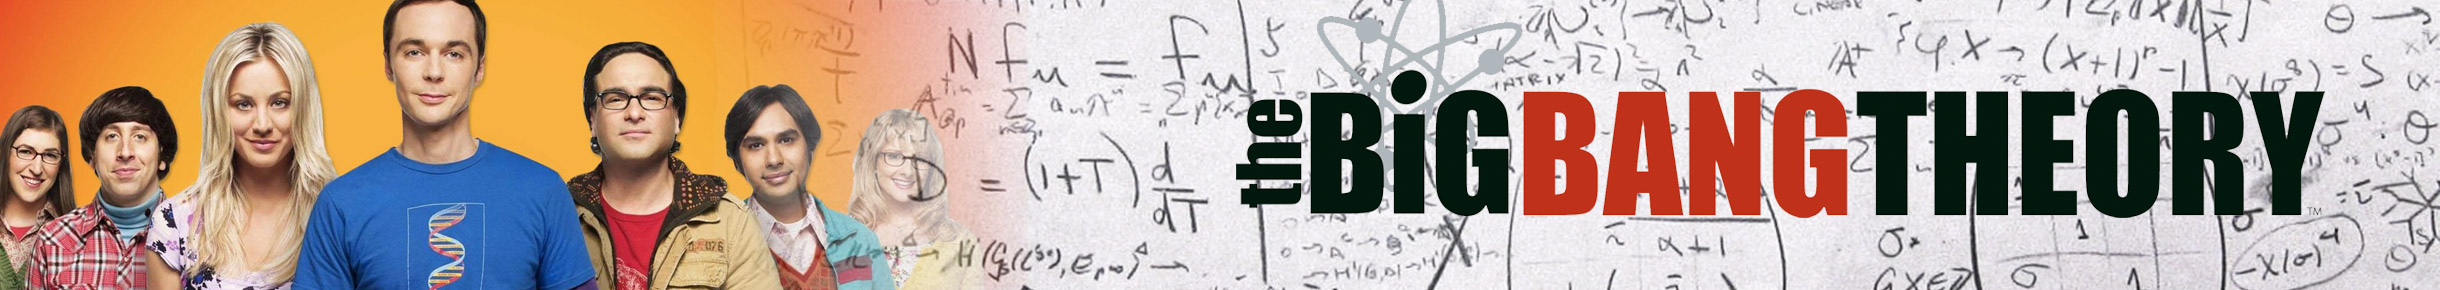 The Big Bang Theory Accessories Banner